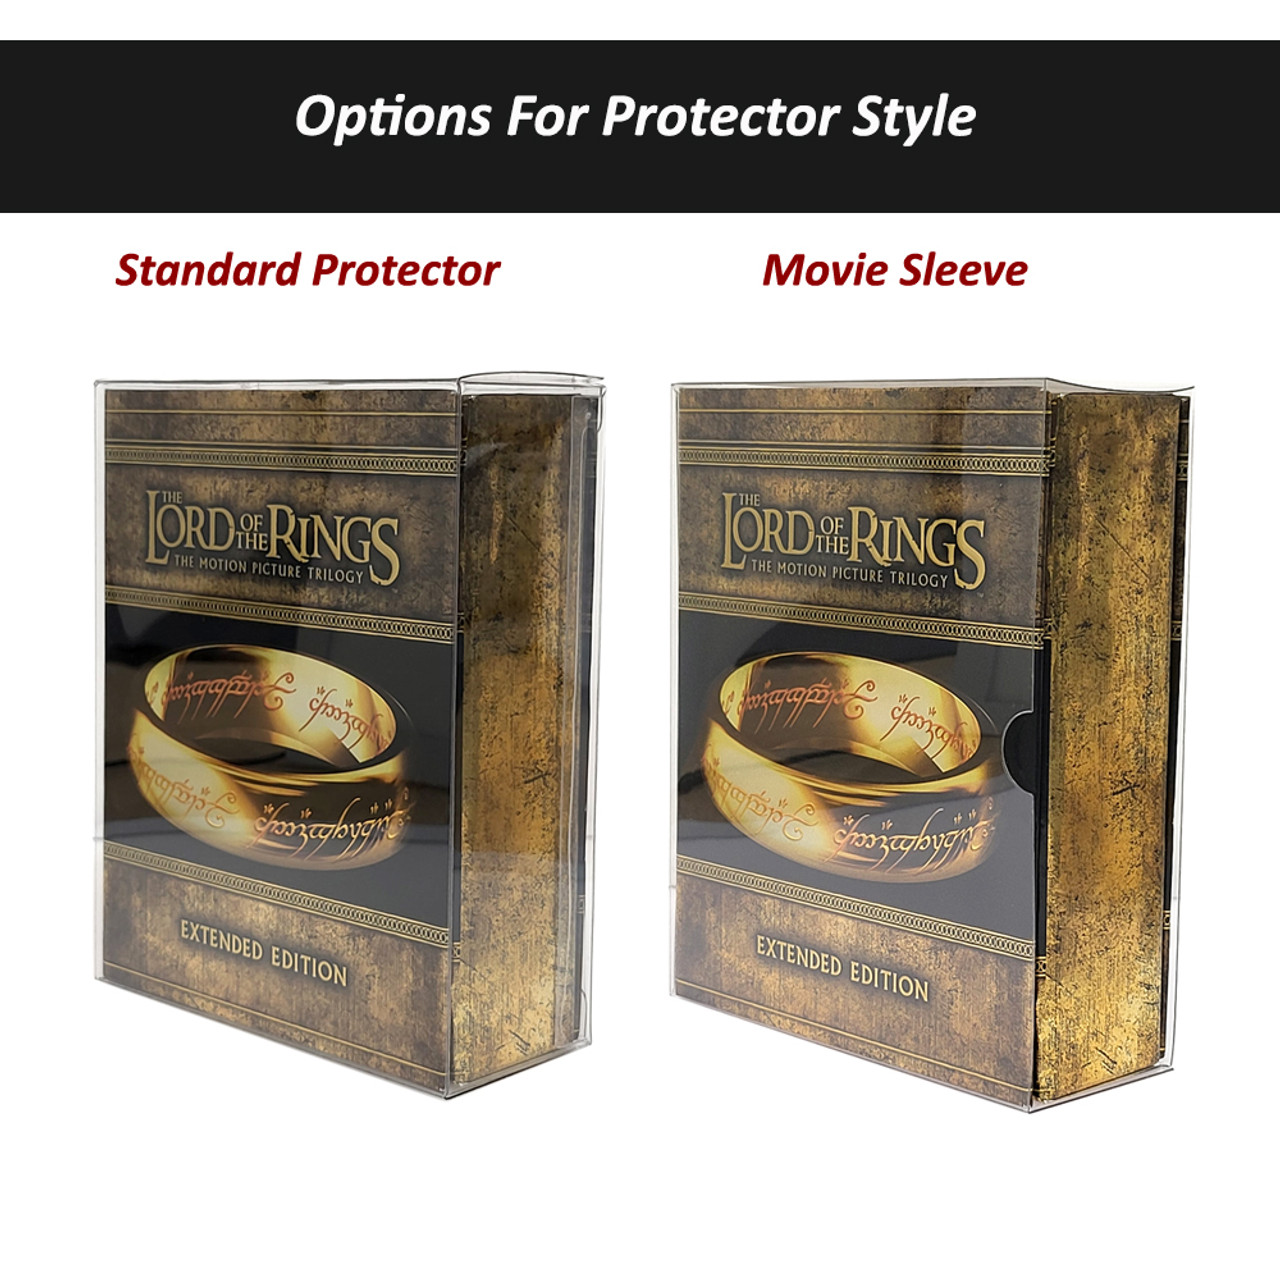 Protector For Rouge Cops and Racateers. Arrow video